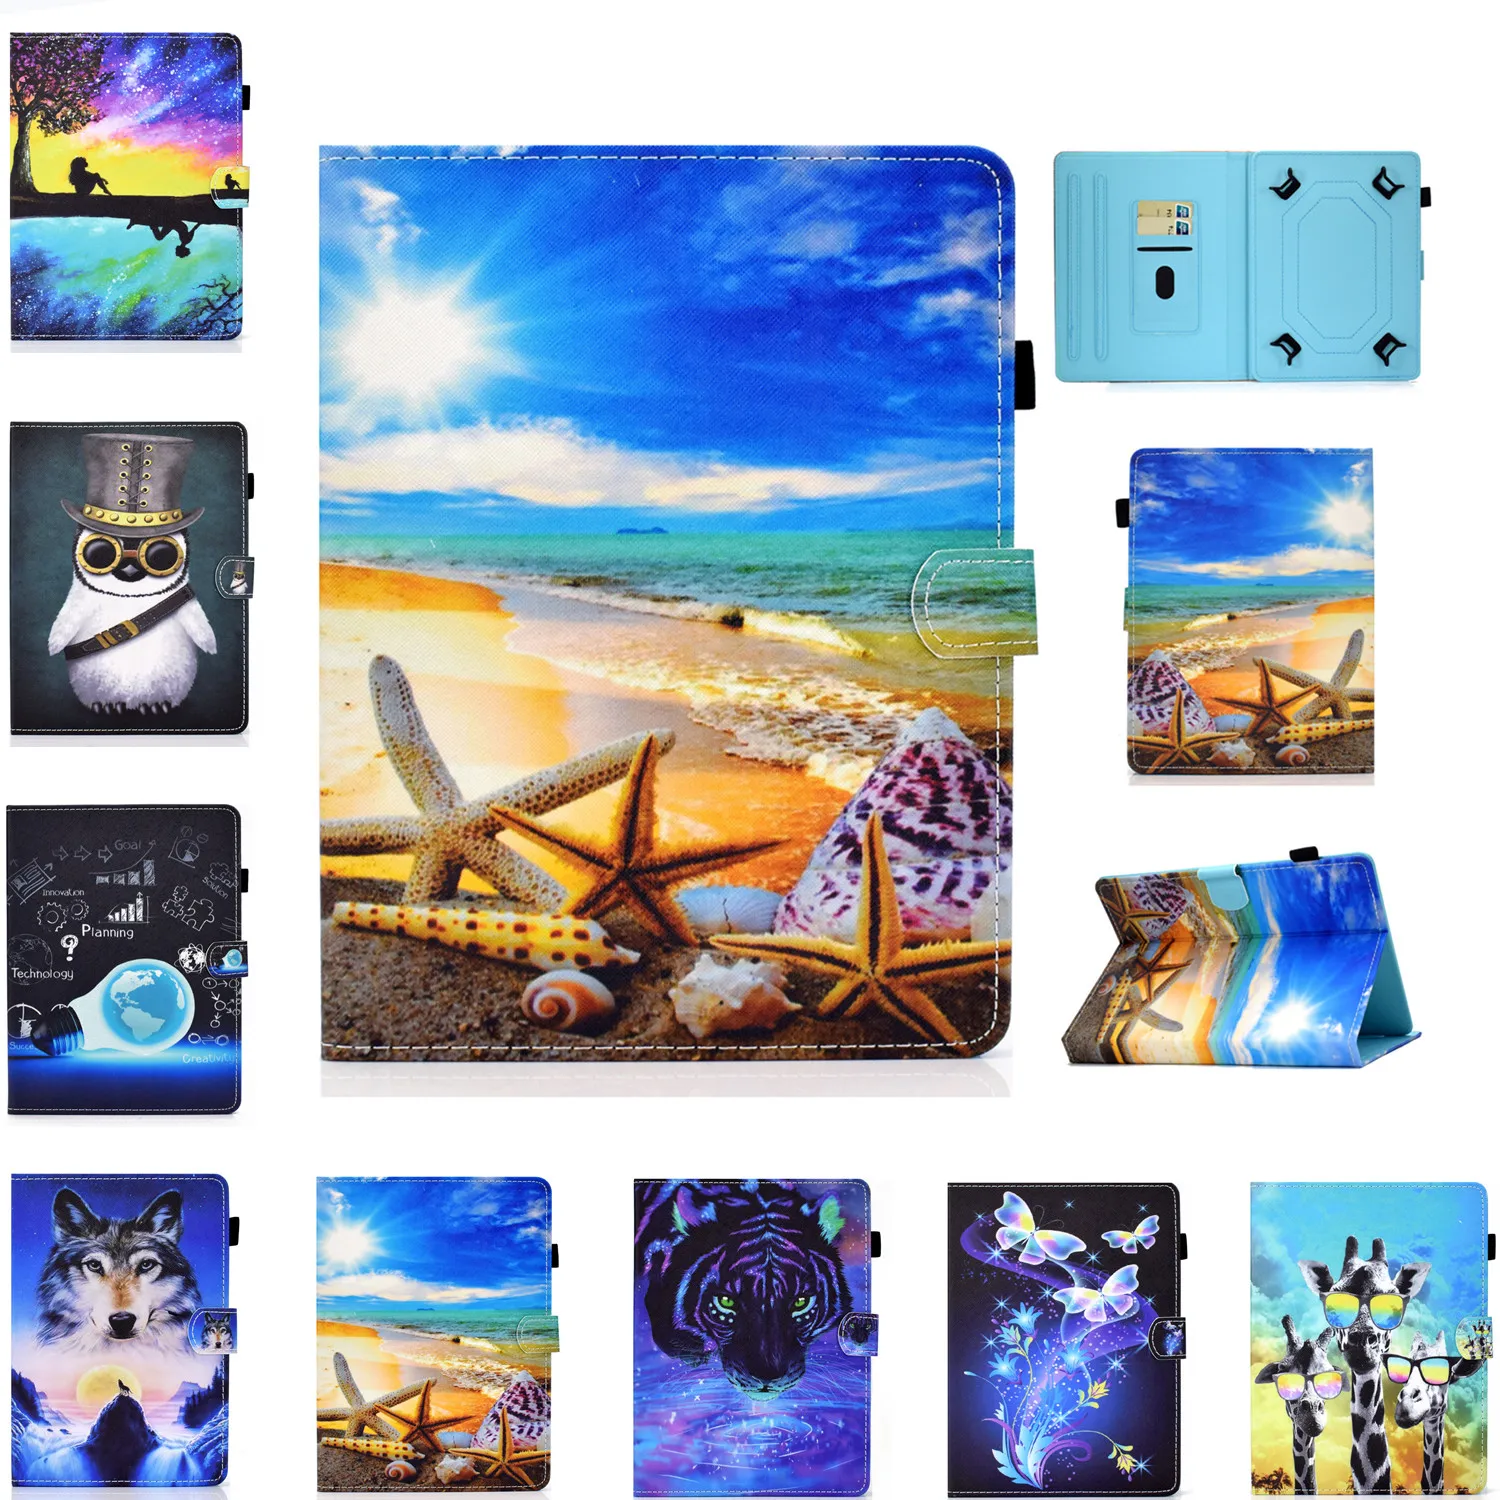 

8.0 Inch Universal Tablet Cover For Huawei Mediapad T8/M5 M3 LITE/T3/T2/T1/Honor Pad 5 8" M6 M5 8.4" inch Teclast P80 (8") Case